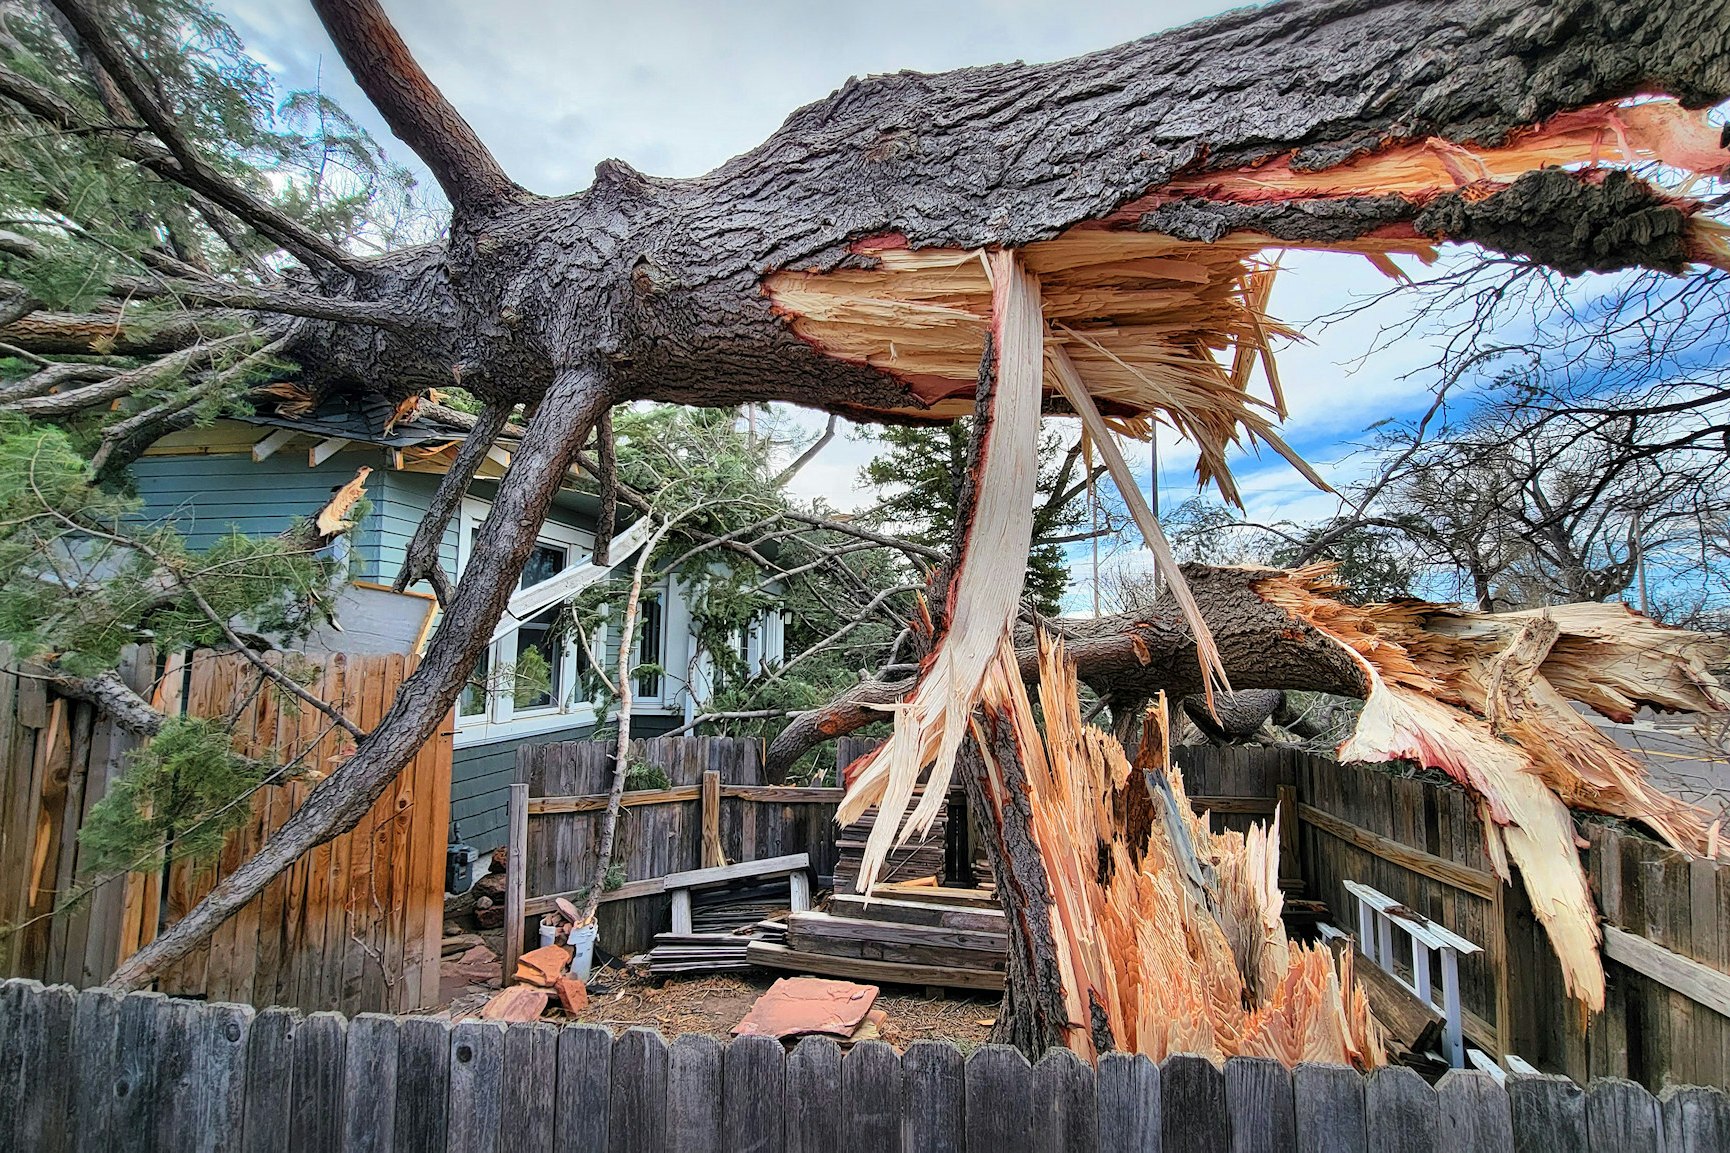 A tree described as "the biggest pine tree in Cheyenne" was felled onto a house over the weekend due to the early April wind storm.